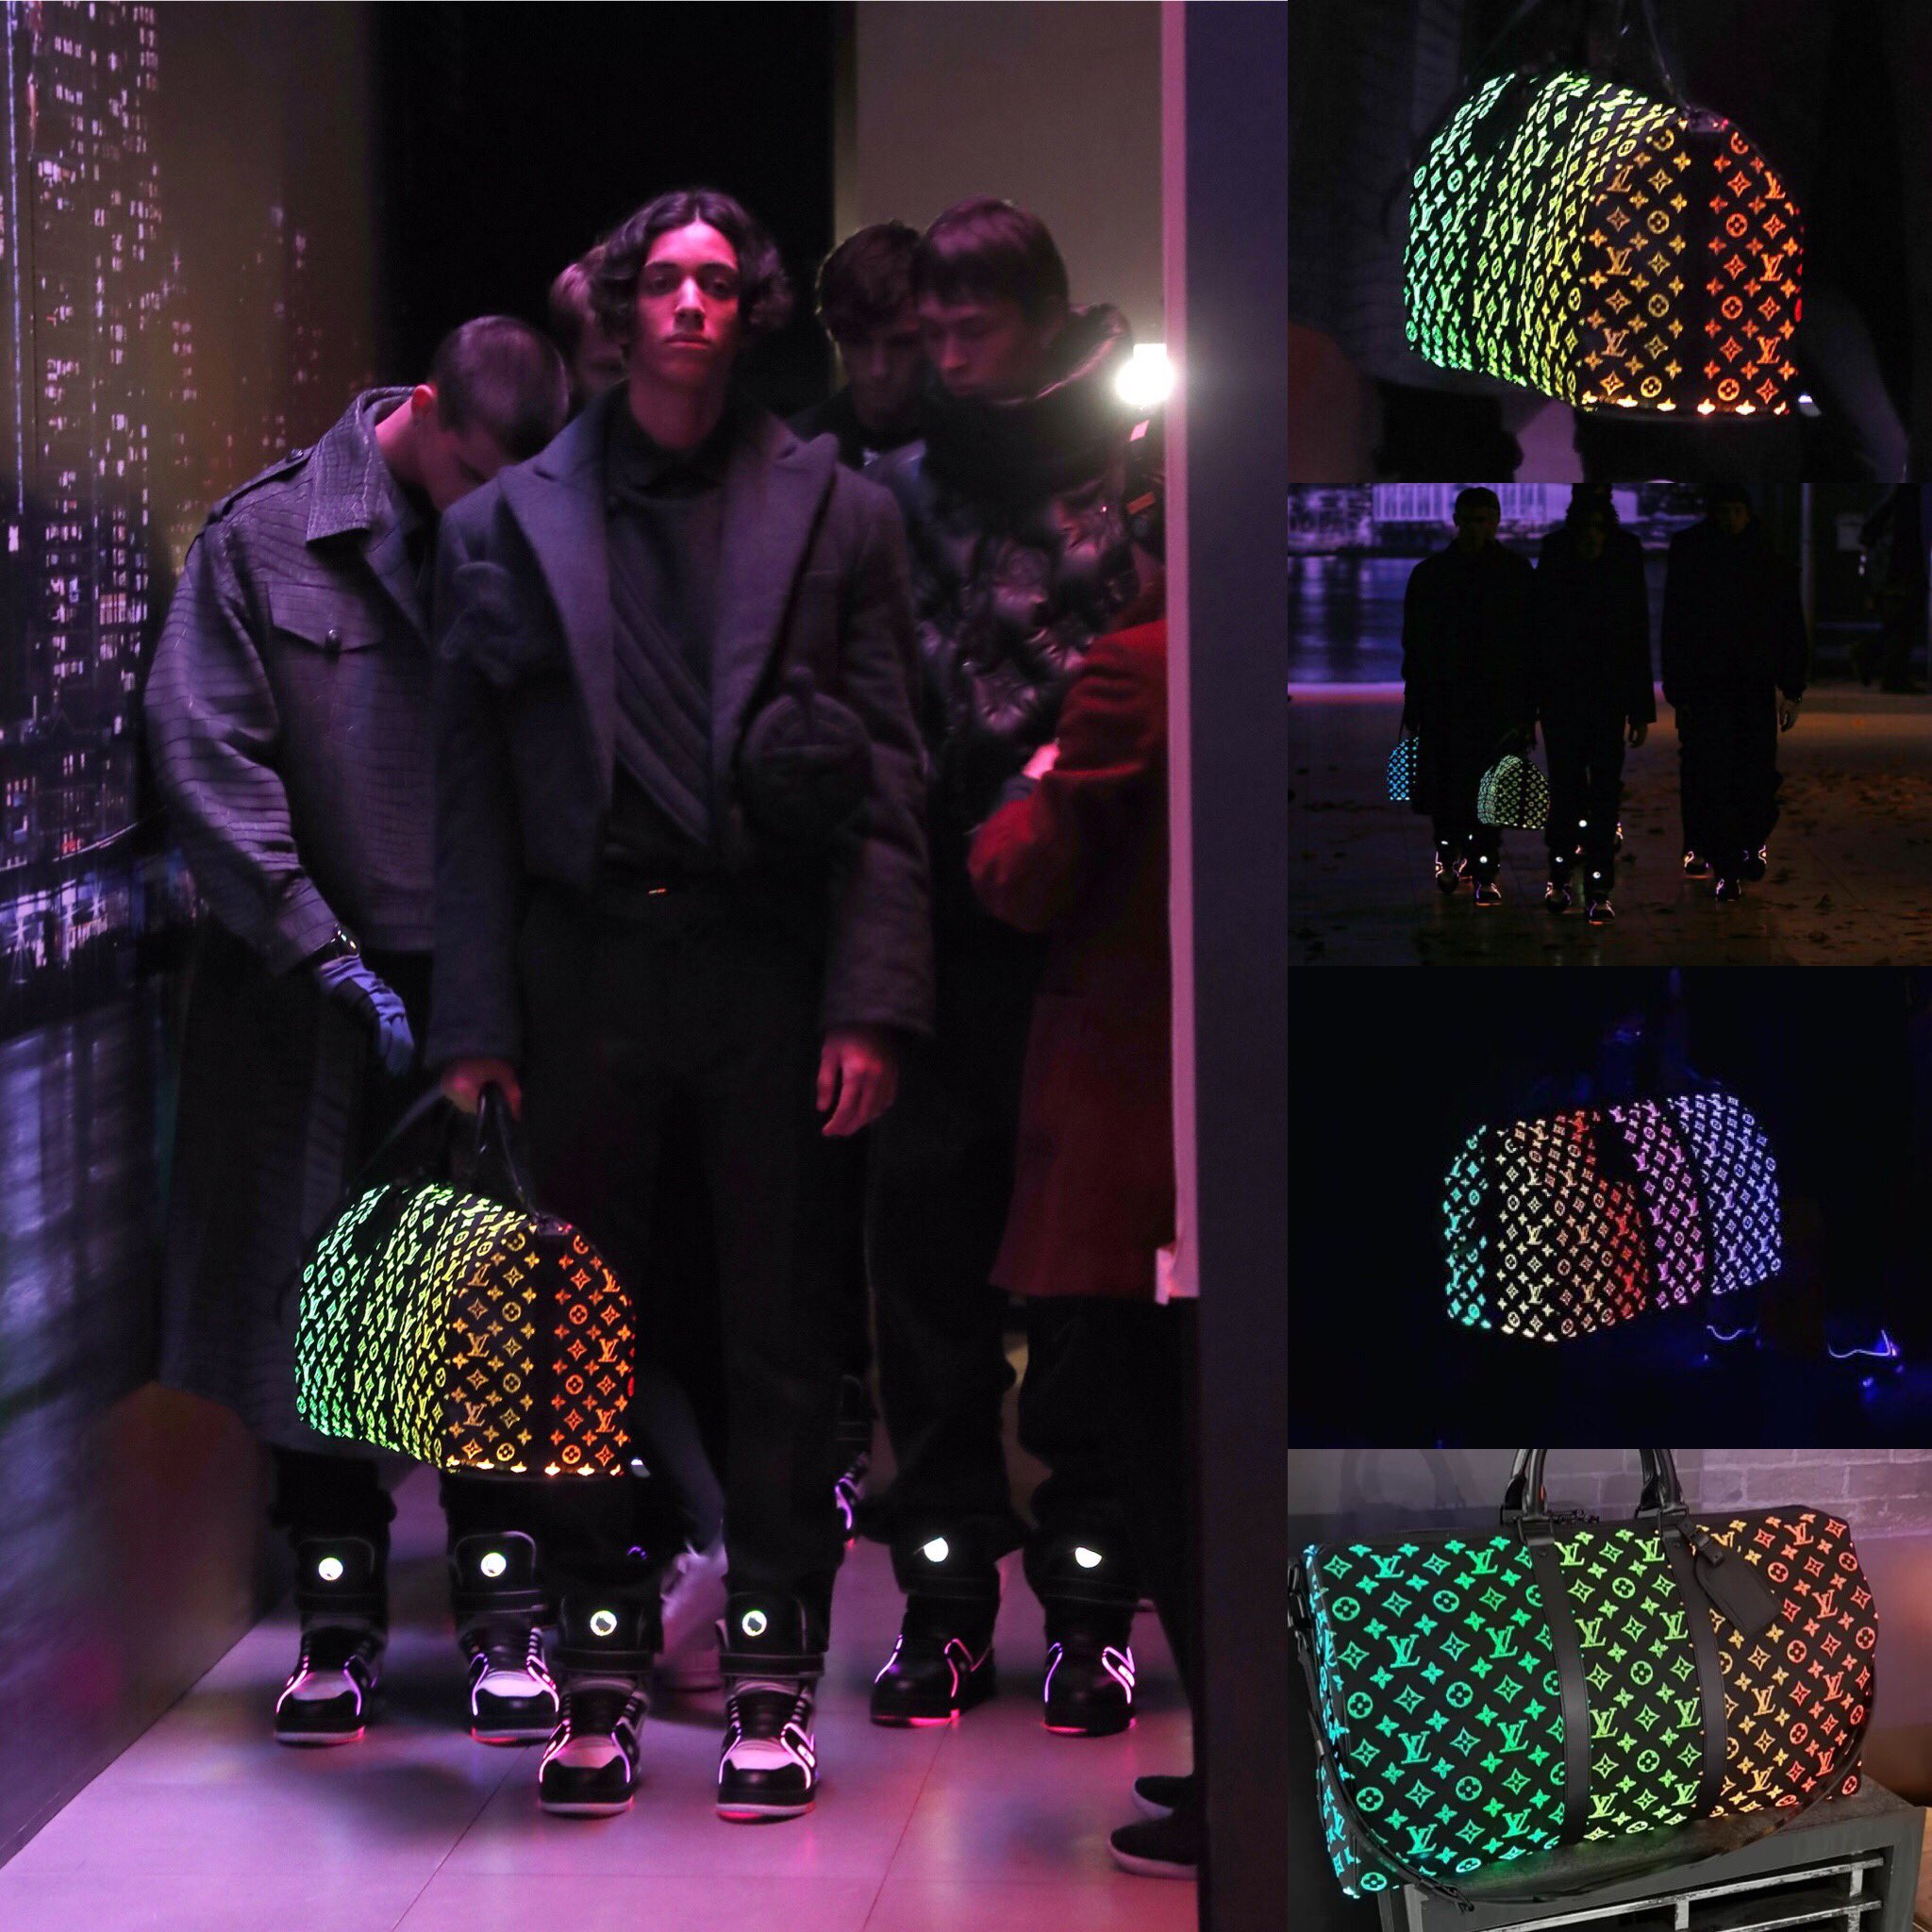 Personal Shopper on "OMG Louis Vuitton just gave us something we didn't know we needed: a glow-in-the-dark Louis Vuitton Monogram Duffel Bag. The bags contain fiber optic lights. #louisvuitton #lv #virgilabloh #